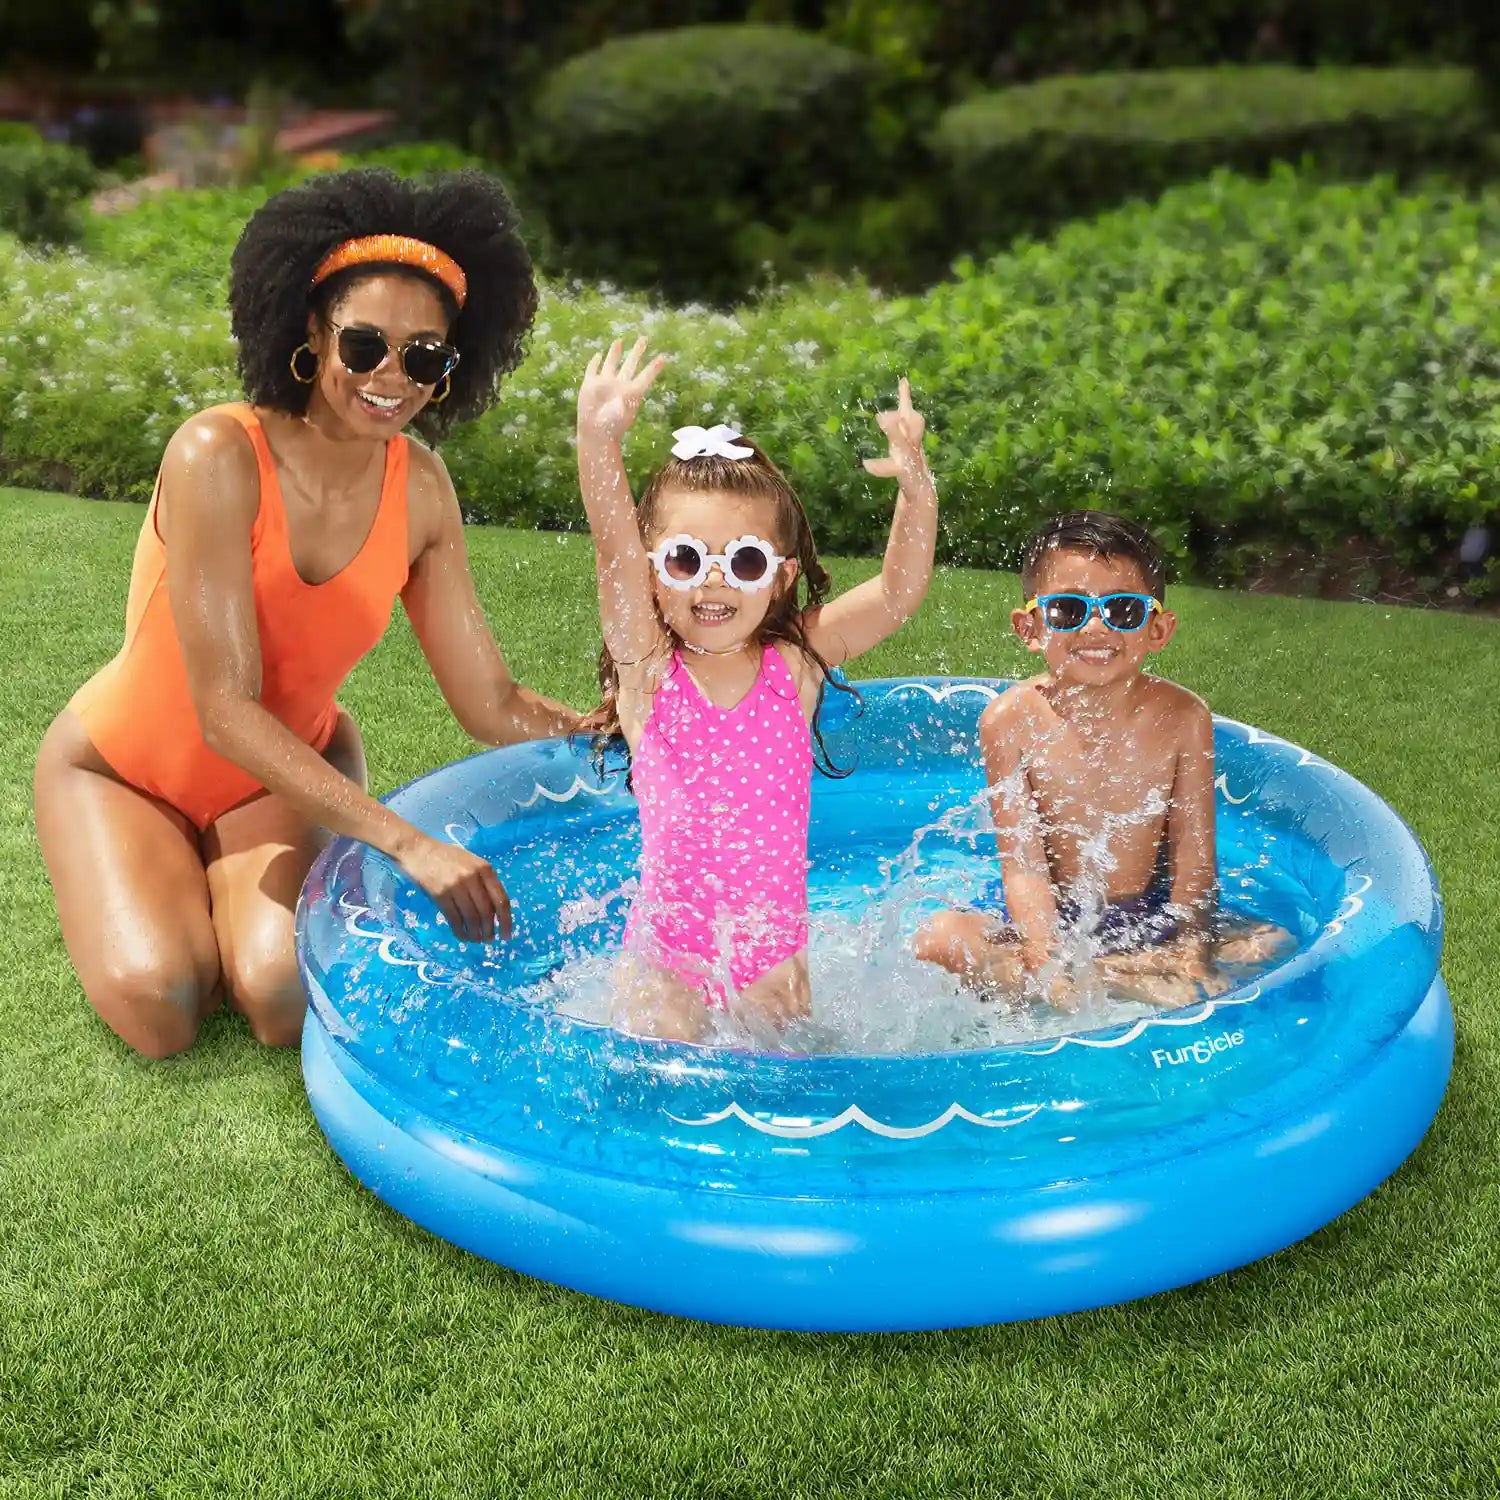 Funsicle Friendly Shark FunRing Pool with models on a grass background